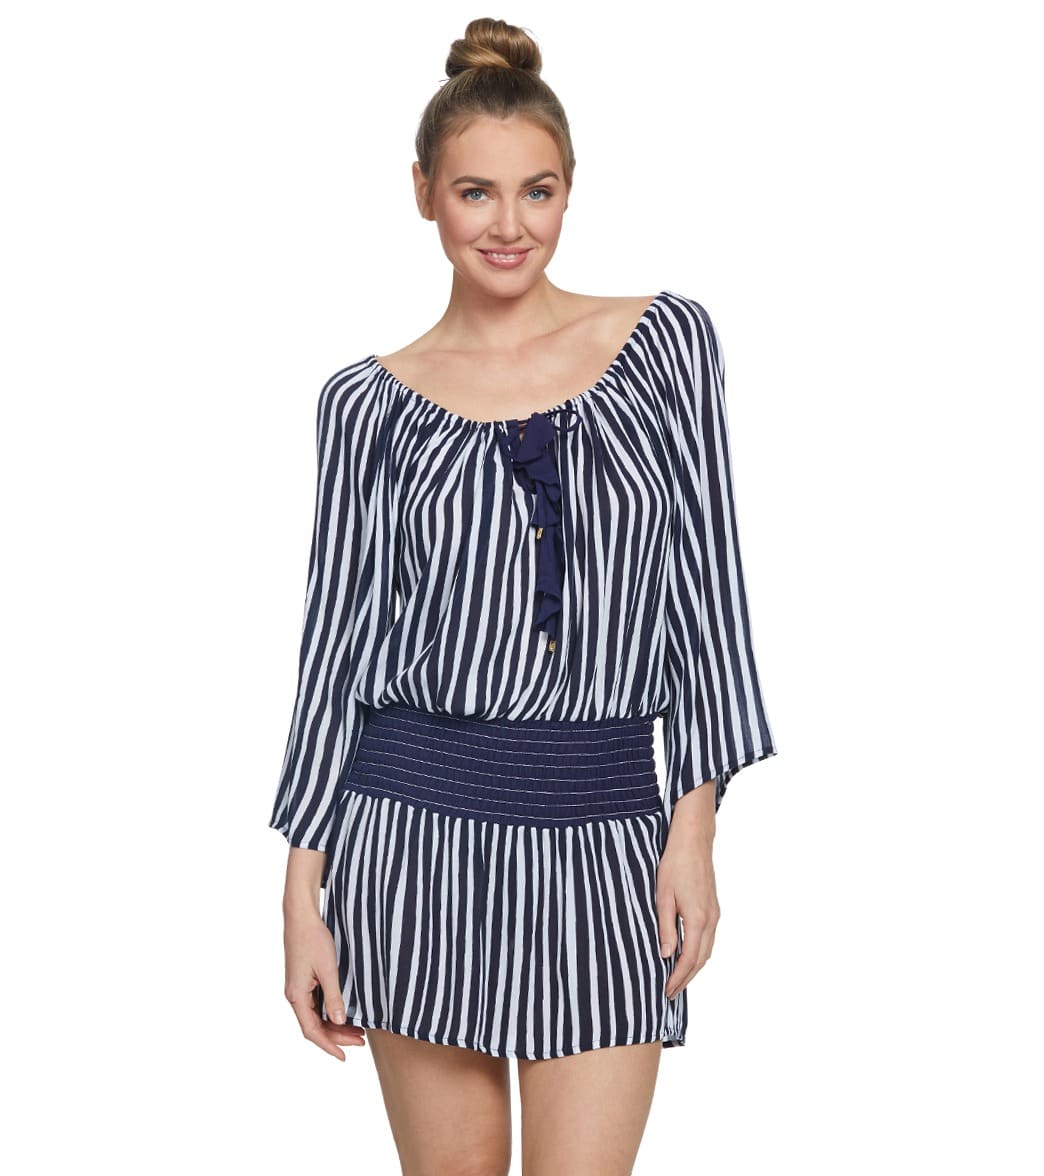 Anne Cole Don't Smock Me Smocked Cover Up Tunic - Navy White Medium - Swimoutlet.com